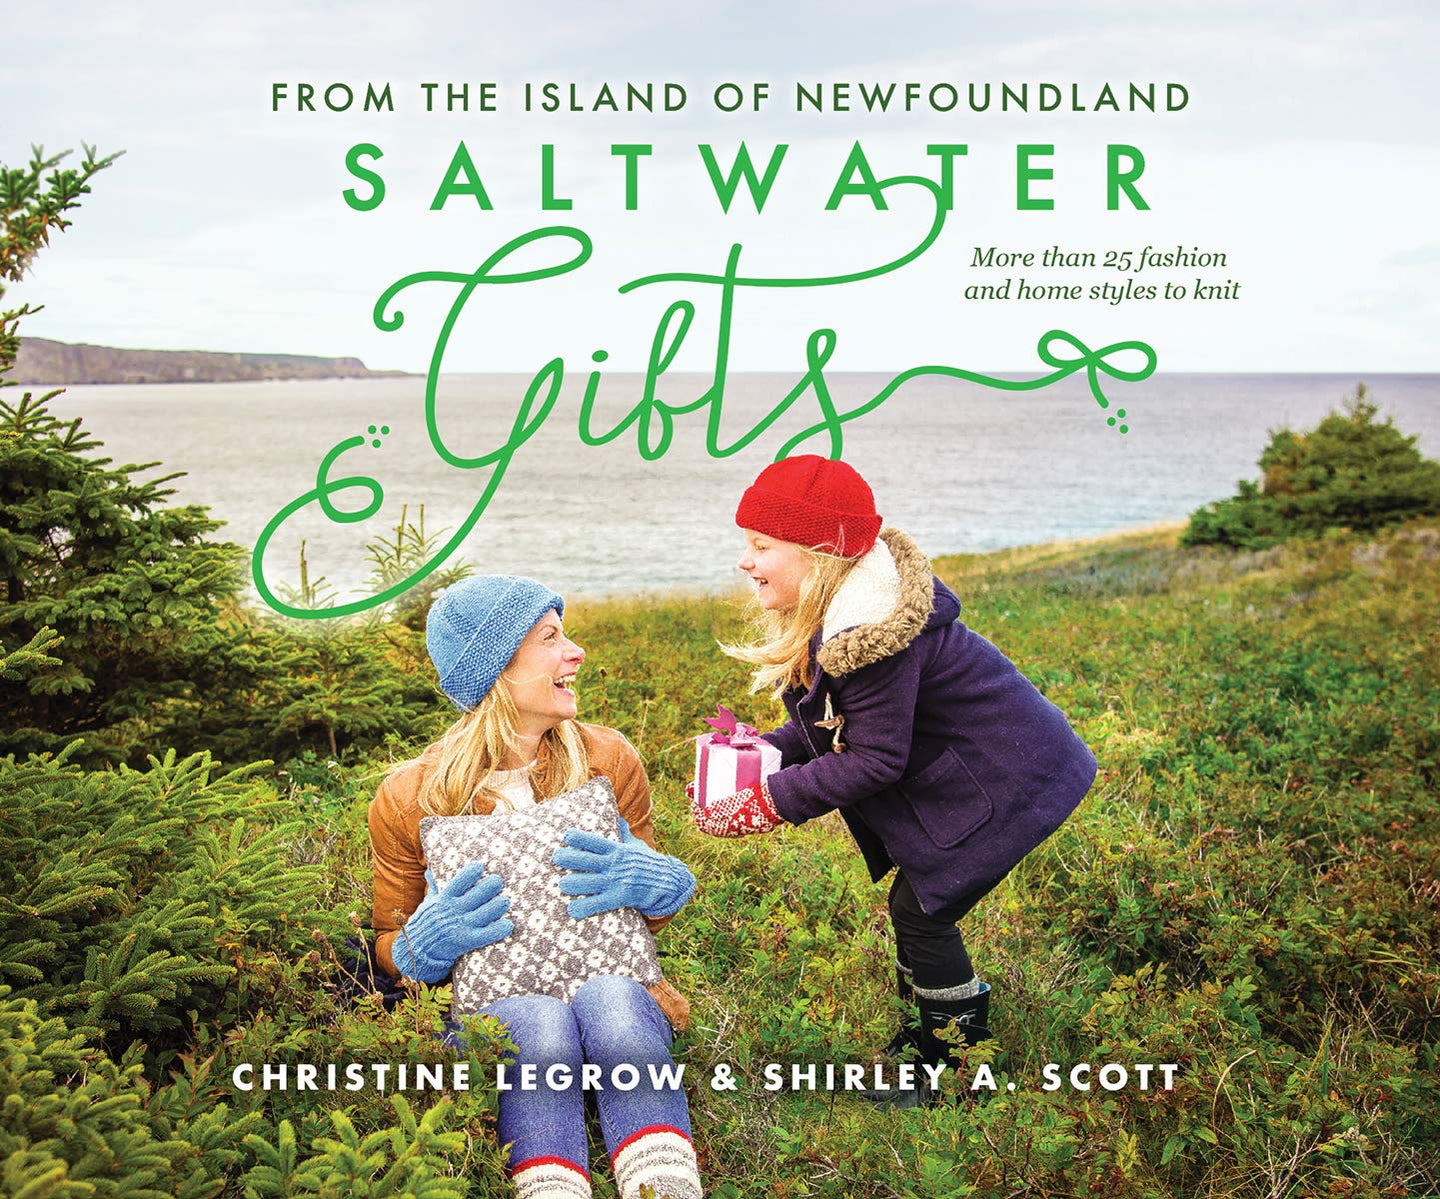 SALTWATER GIFTS FROM THE ISLAND OF NEWFOUNDLAND